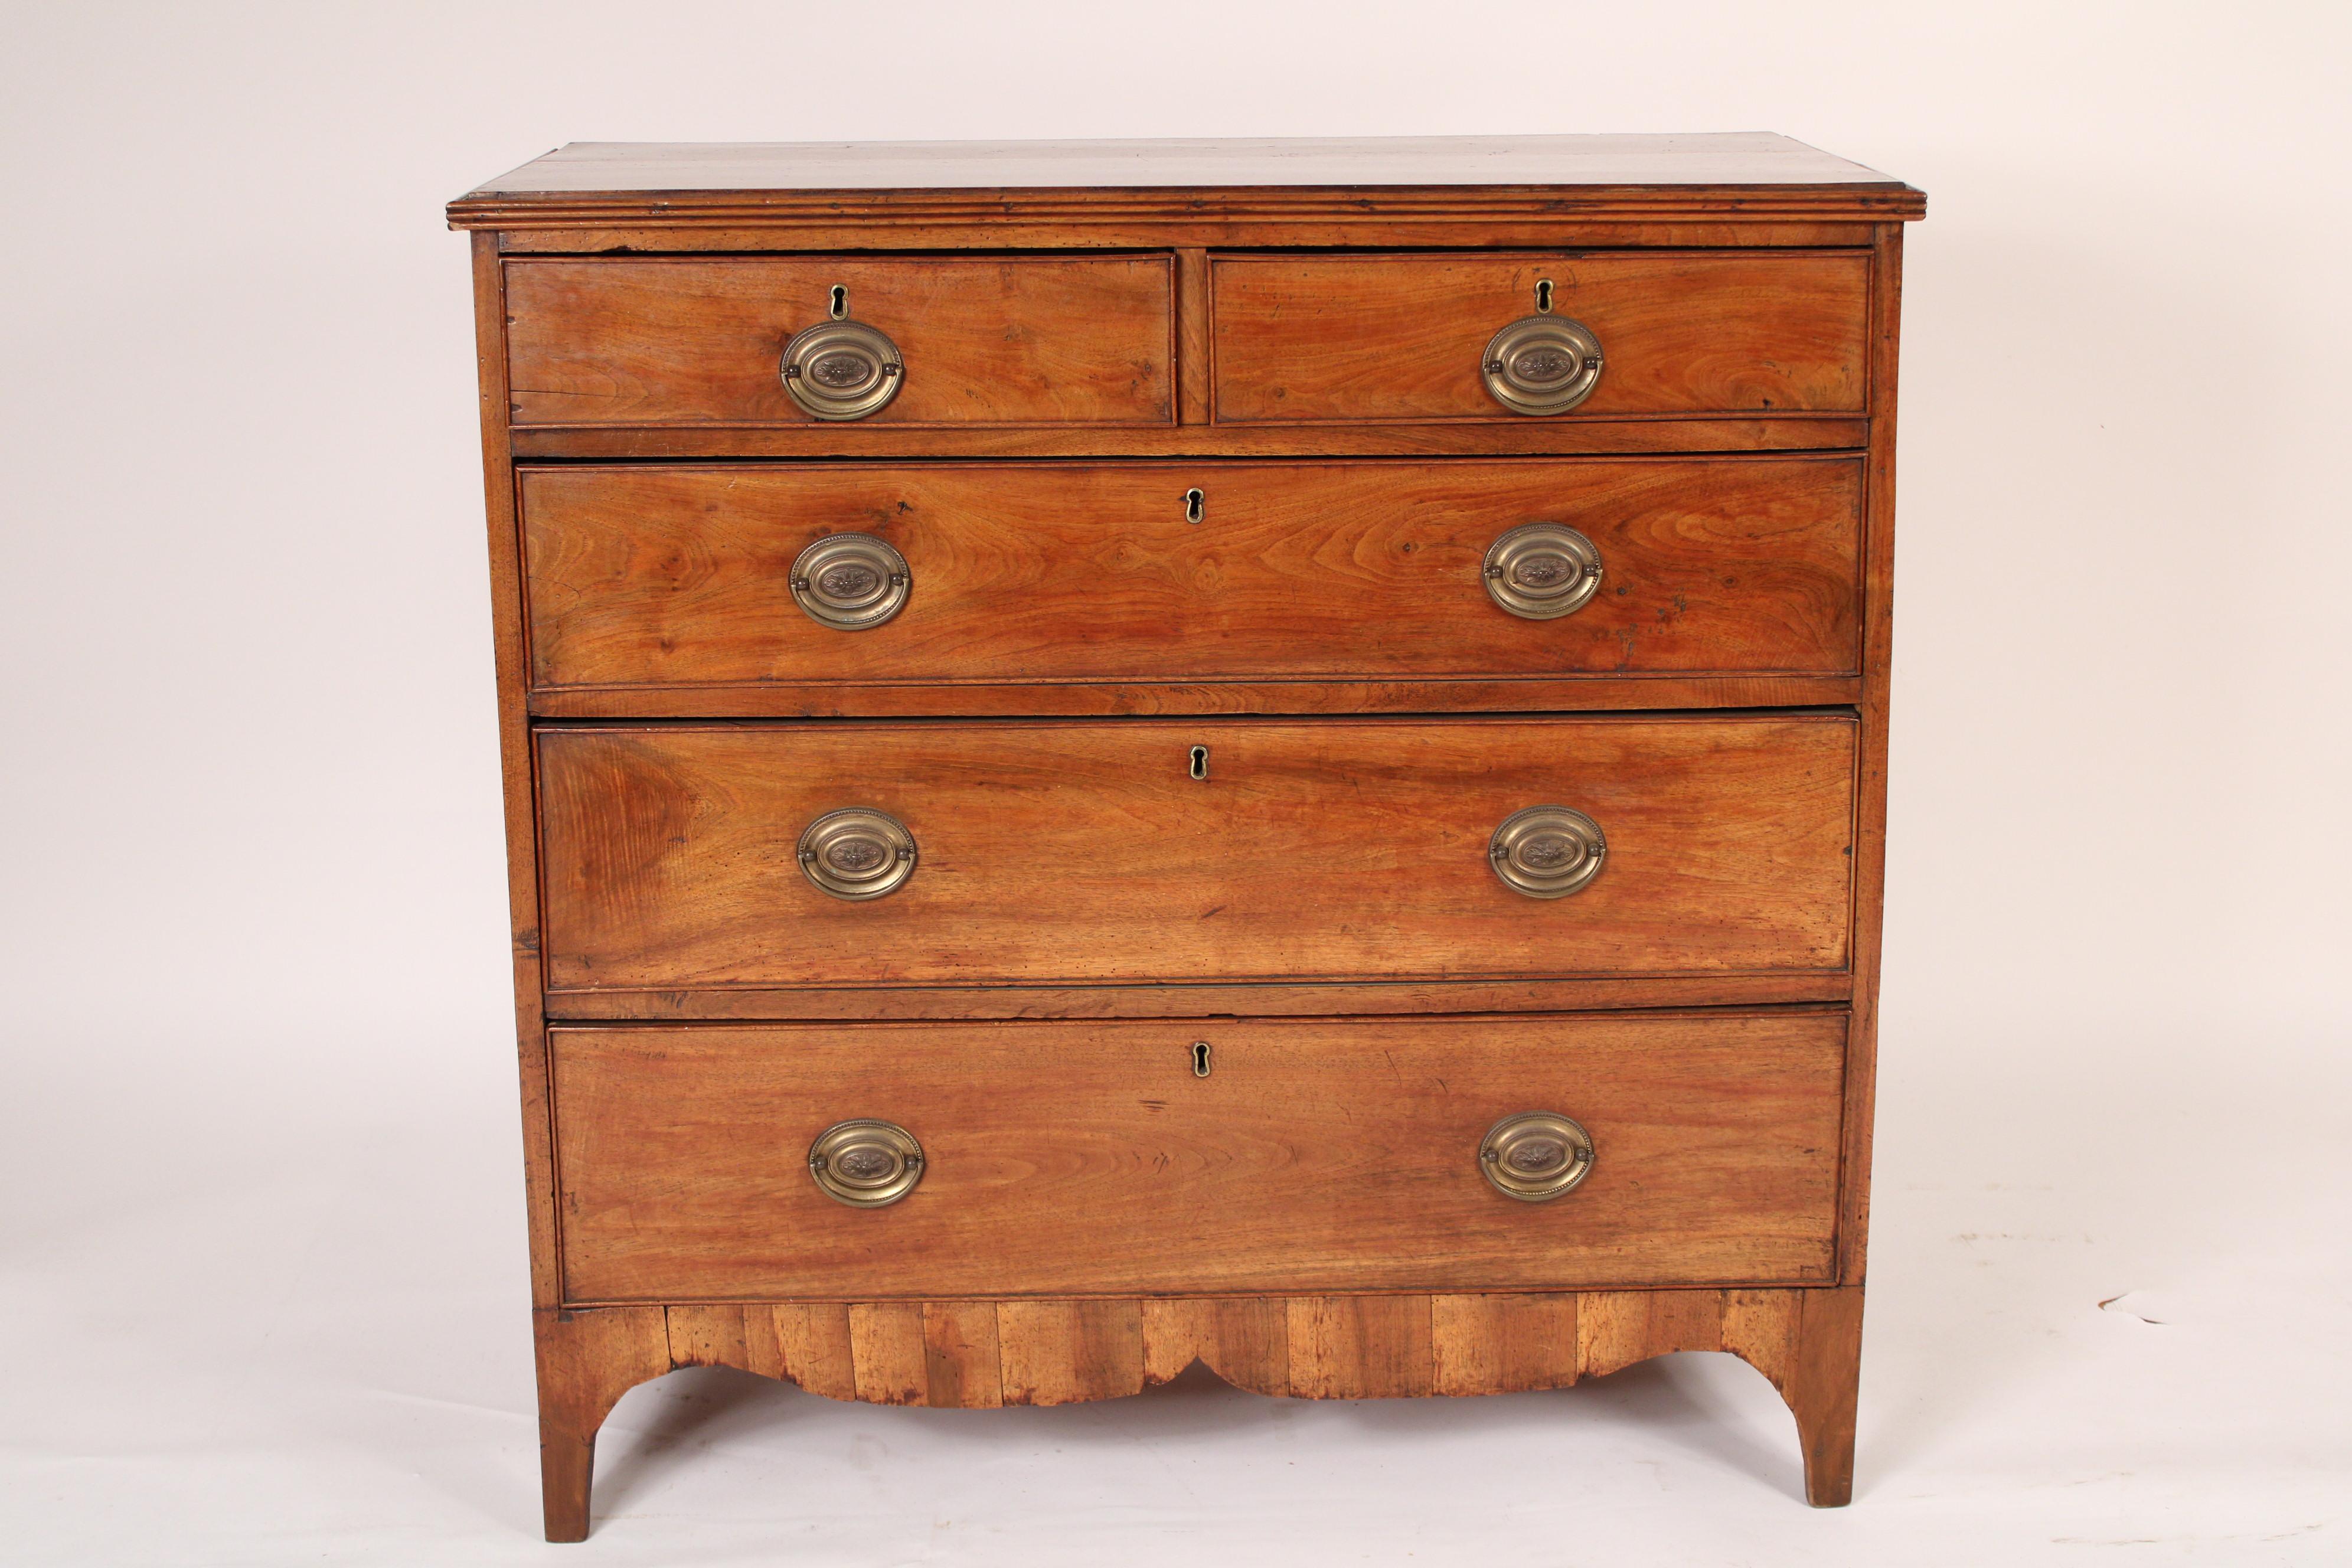 George III mahogany chest of drawers, circa 1800. With a rectangular slightly over hanging top with reeded molding on front and sides, two top drawers and 3 graduated lower drawers, classical oval brass hardware and a double serpentine shaped apron.